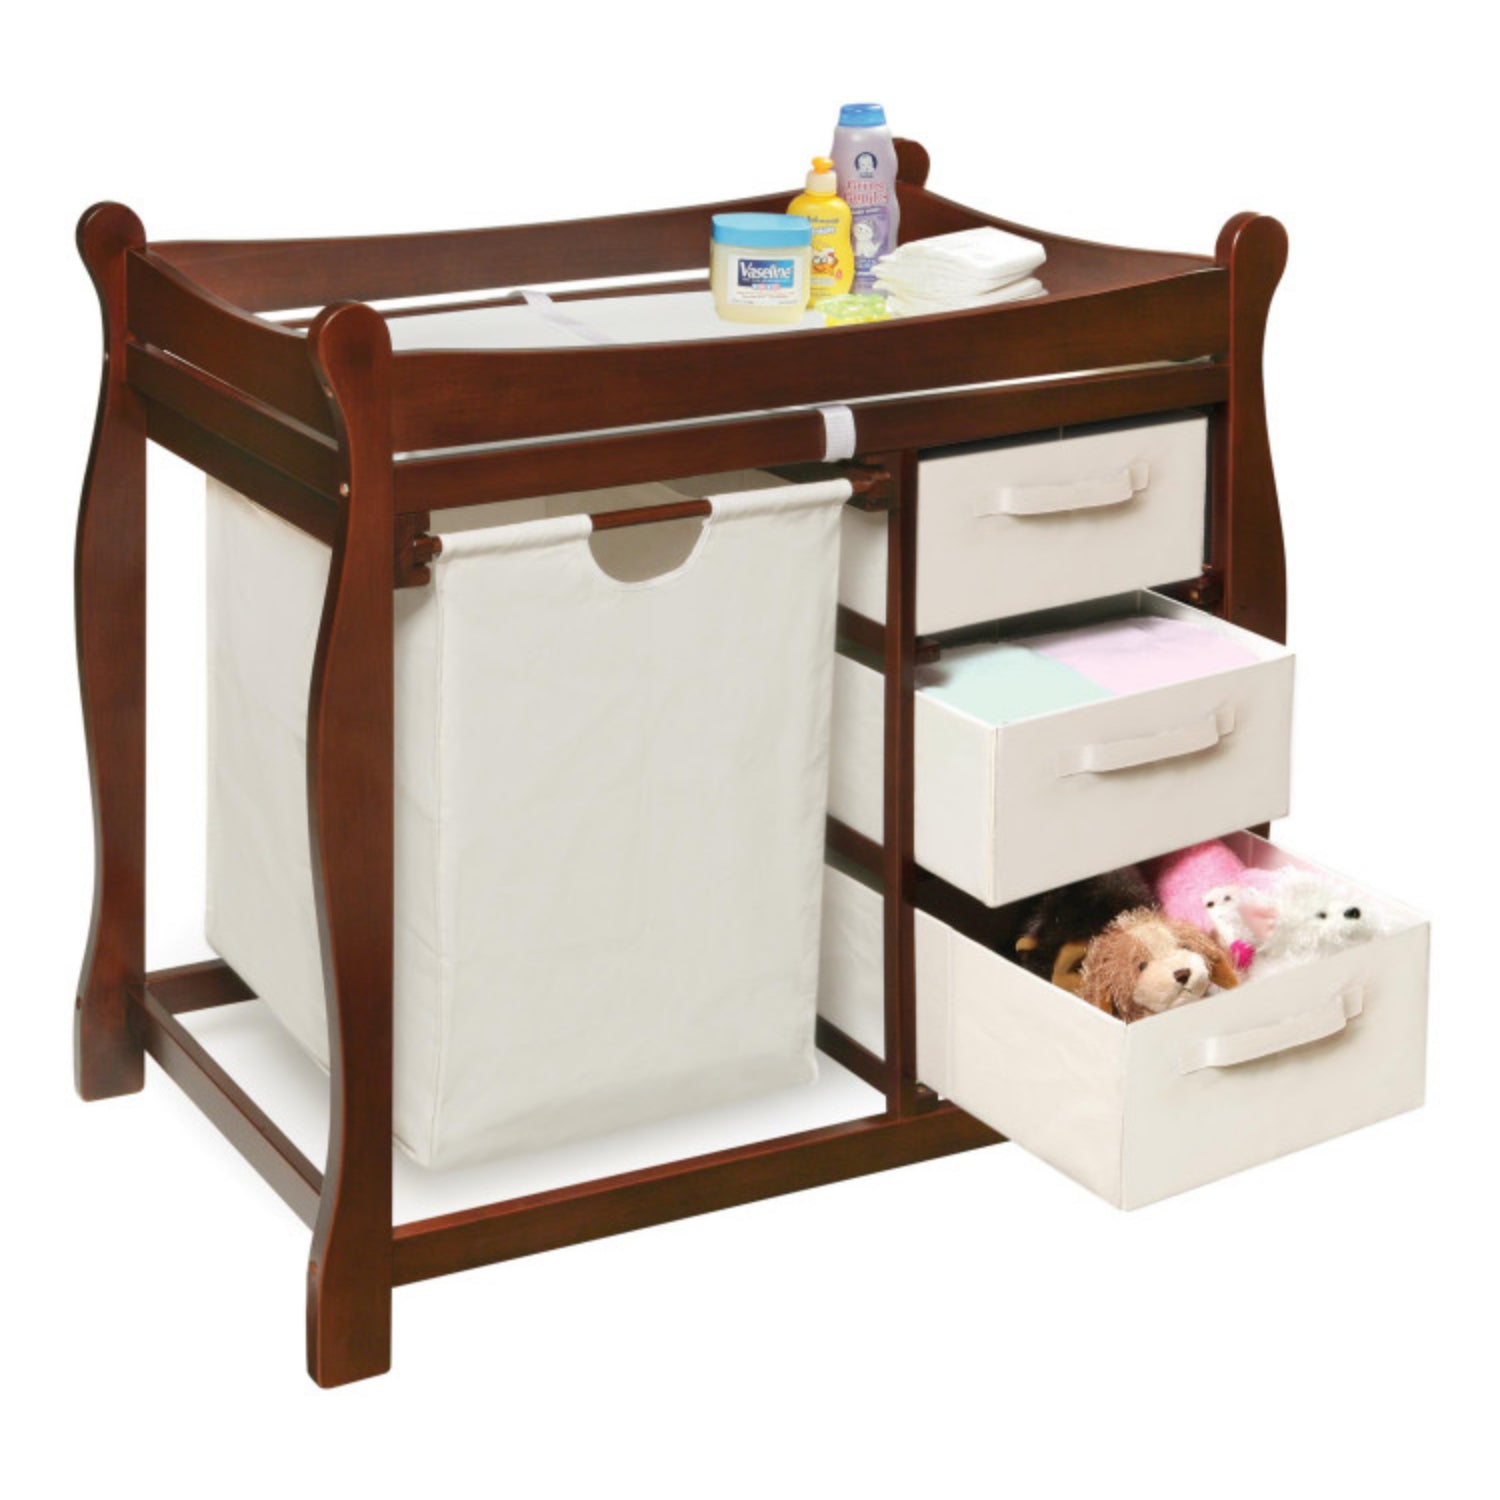 Badger Basket Sleigh Style Baby Changing Table with Hamper and 3 Baskets – Cherry